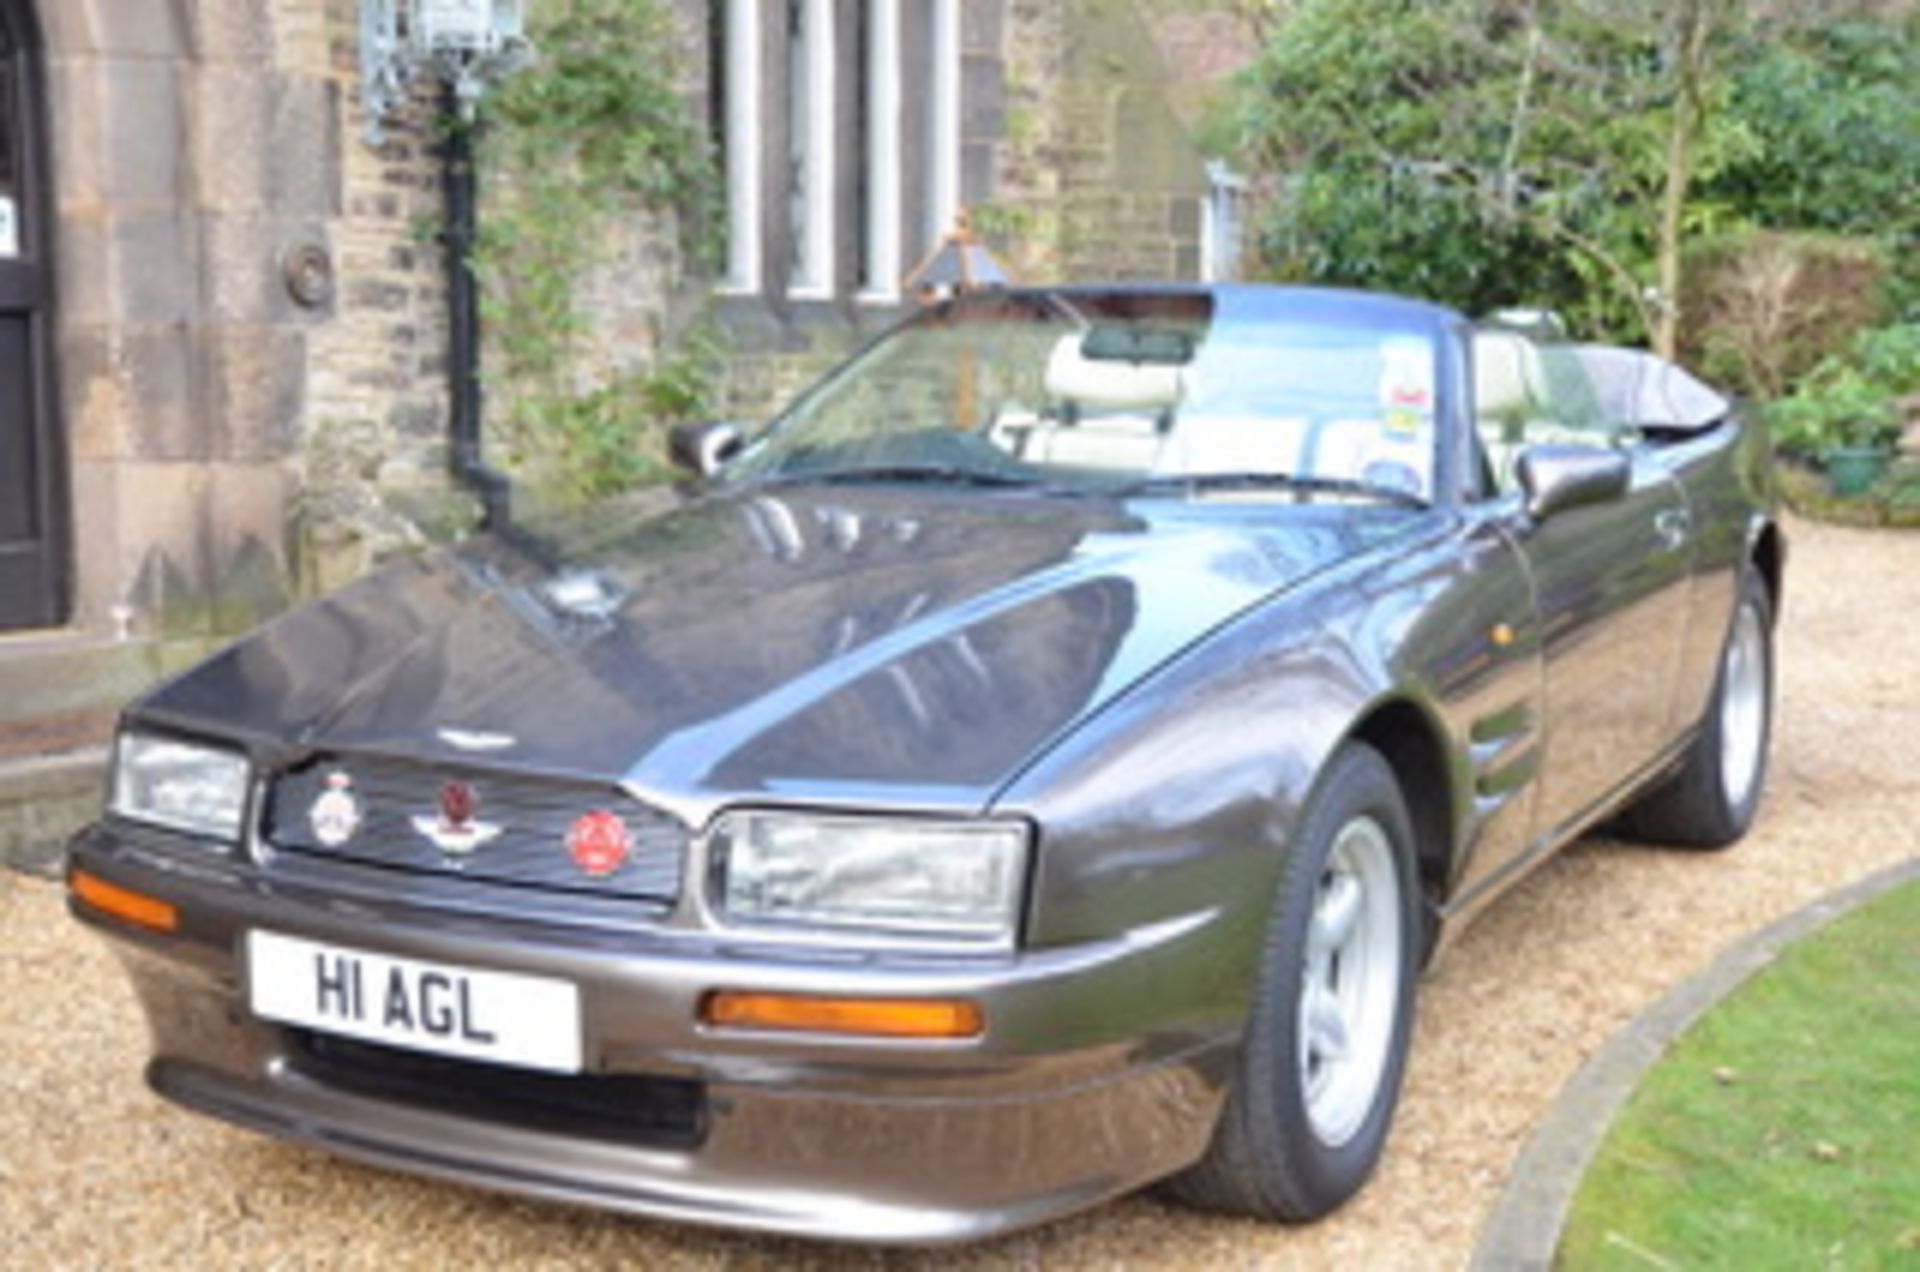 1993 Aston Martin Virage Volante - Having 11 months MOT and aviators number plate H1 AGL - Image 4 of 48